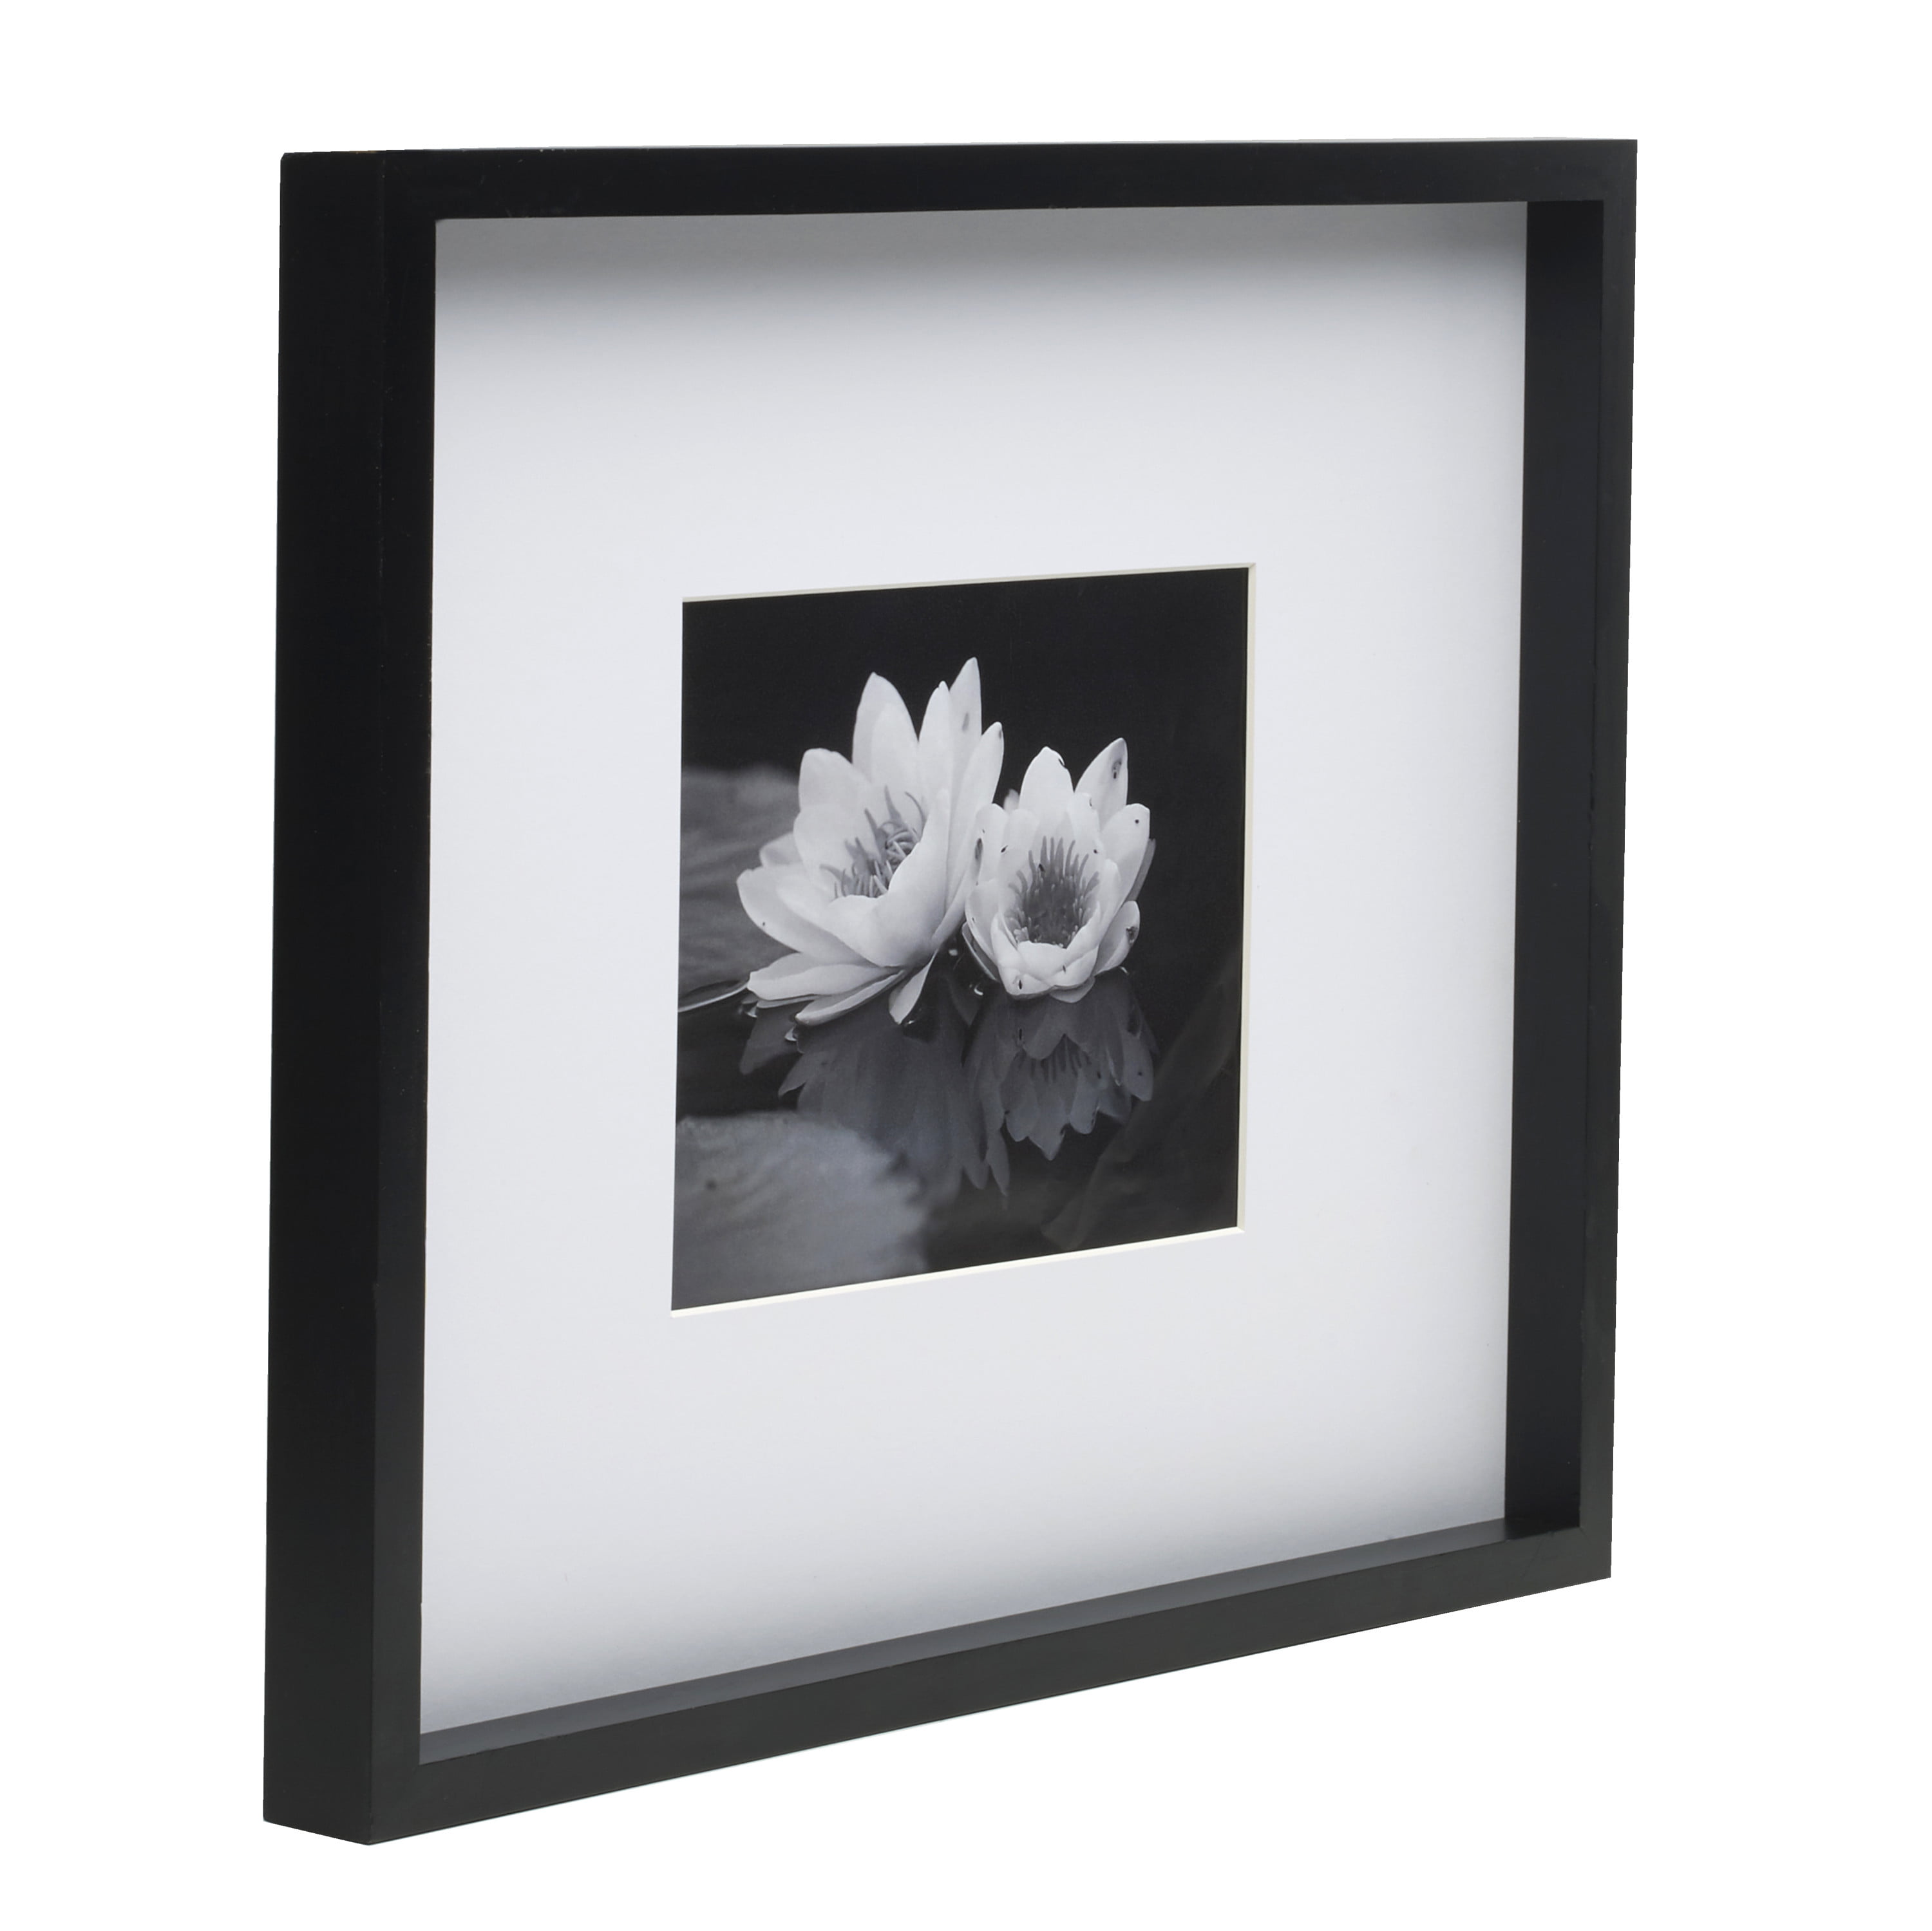 Melannco 12.8 x 12.8 Inch Black Wood Photo Frames to Hold 12x12 Photo  Without Mat